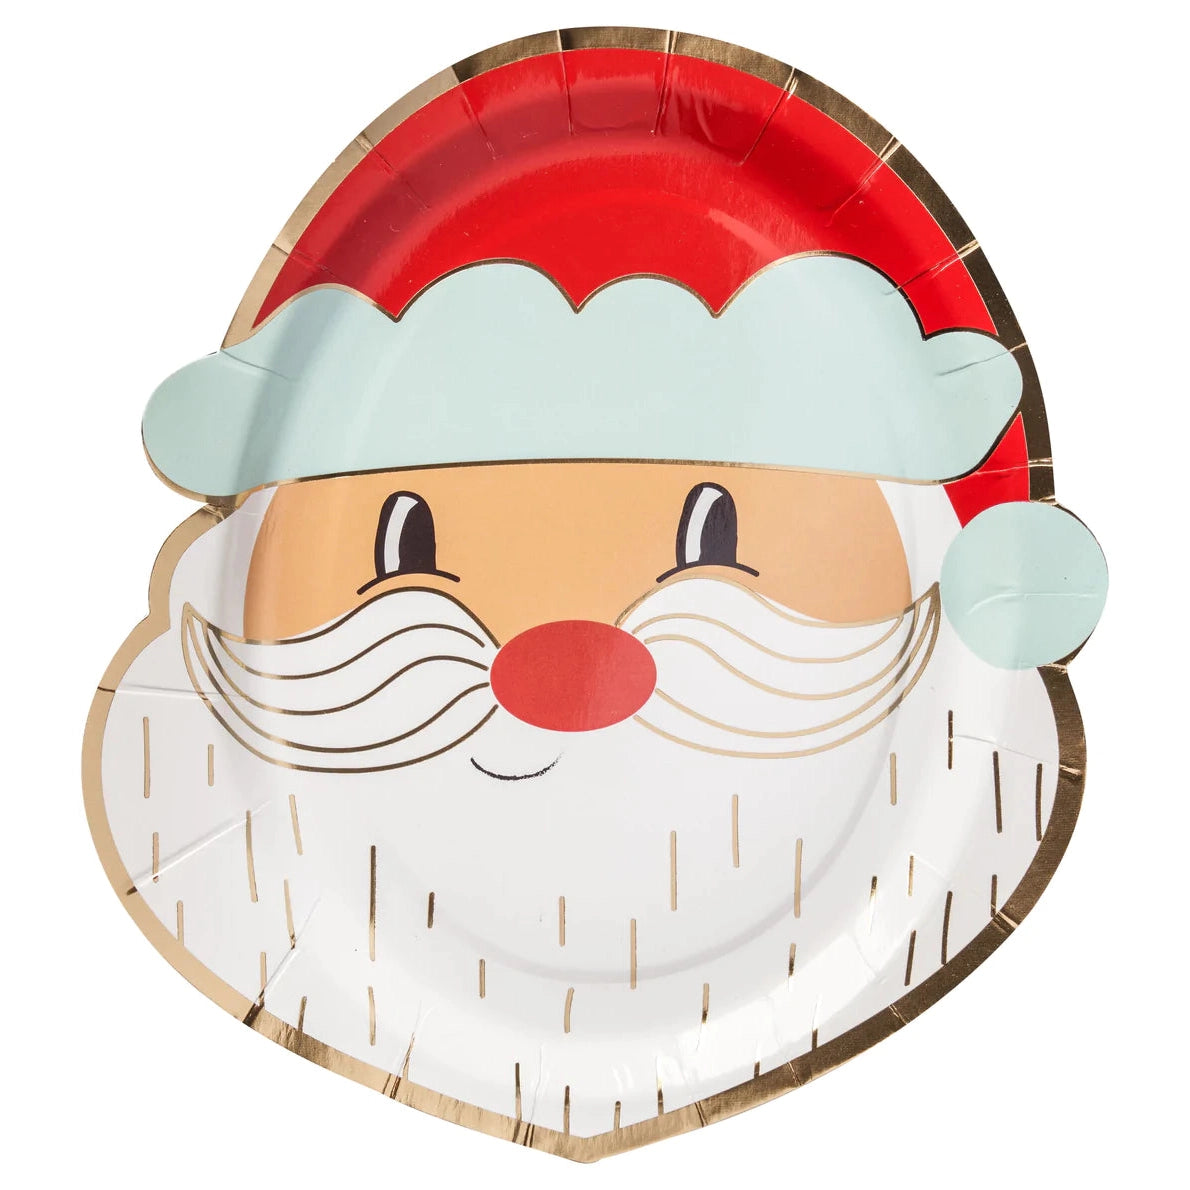 Sophistiplate Deck the Halls Santa Hat Plate-Paper Products-Kevin's Fine Outdoor Gear & Apparel